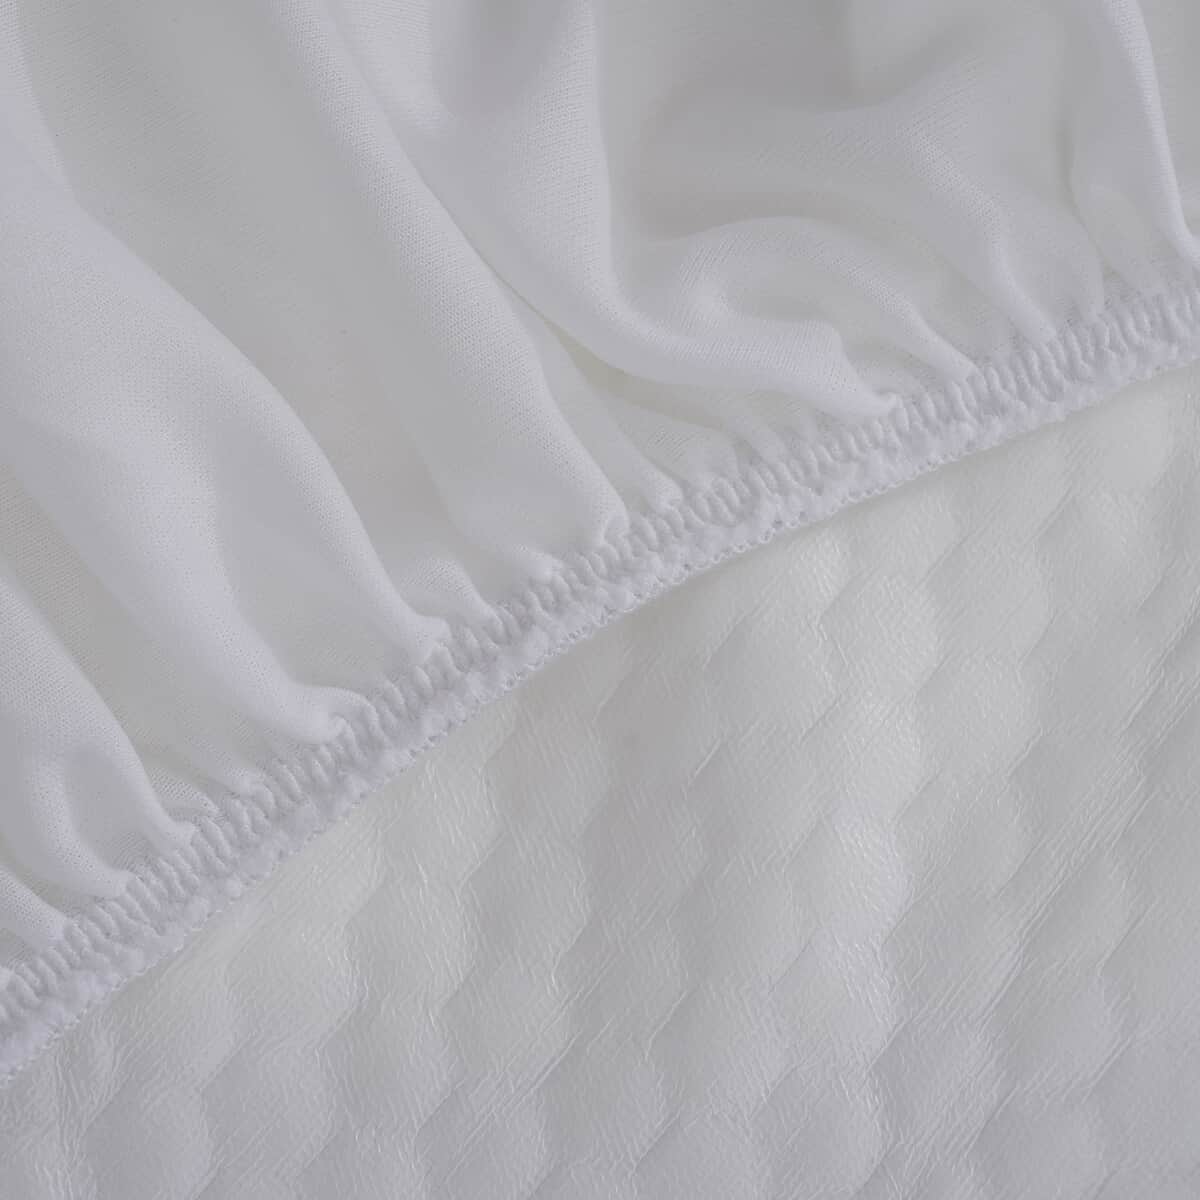 HOMESMART White Jacquard Cooling Waterproof Mattress Protector - Queen (with 15 Deep Pocket) image number 3